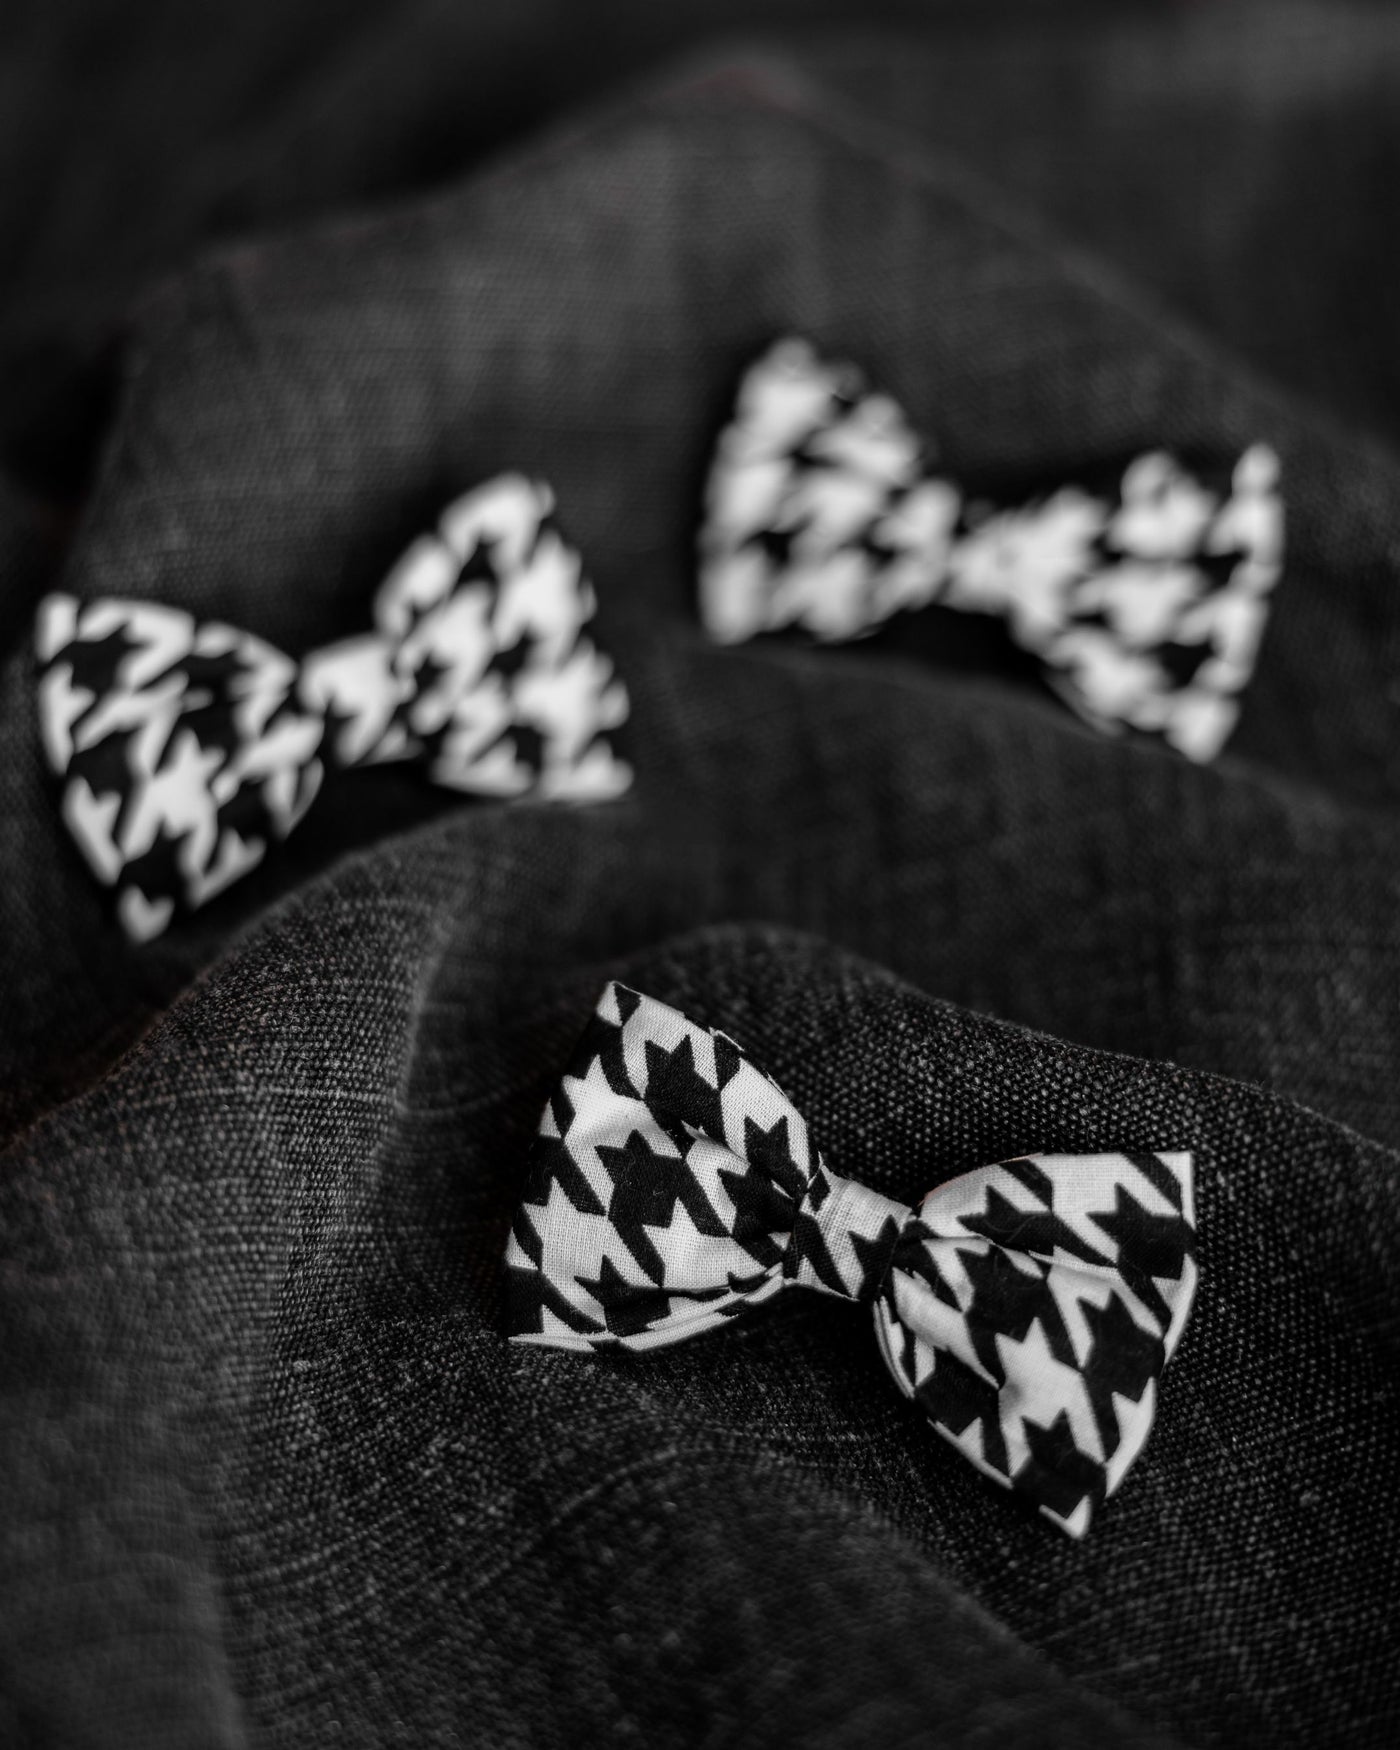 Watson Black + White Houndstooth Bow Tie Product Image Detail